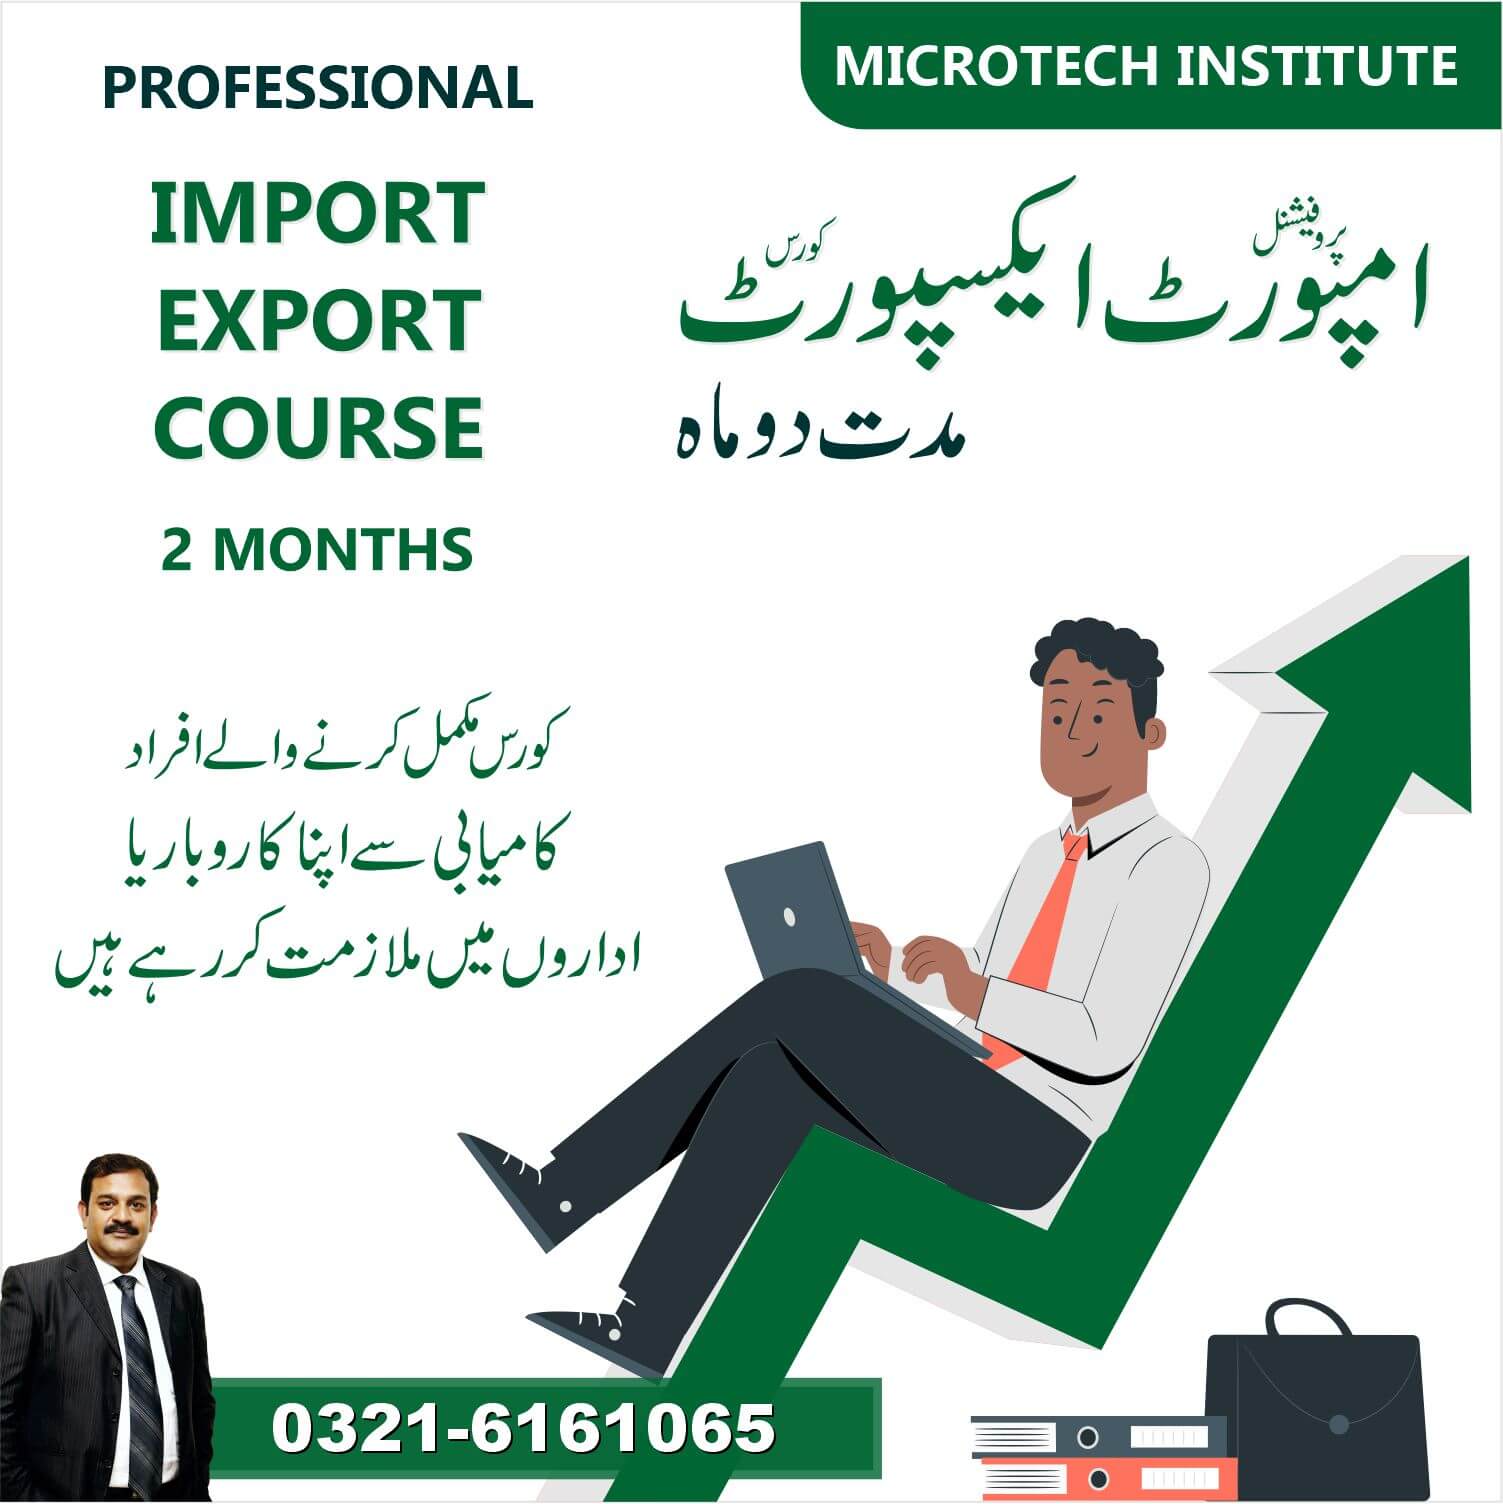 import export course practical training coaching classes in sialkot microtech institute best college